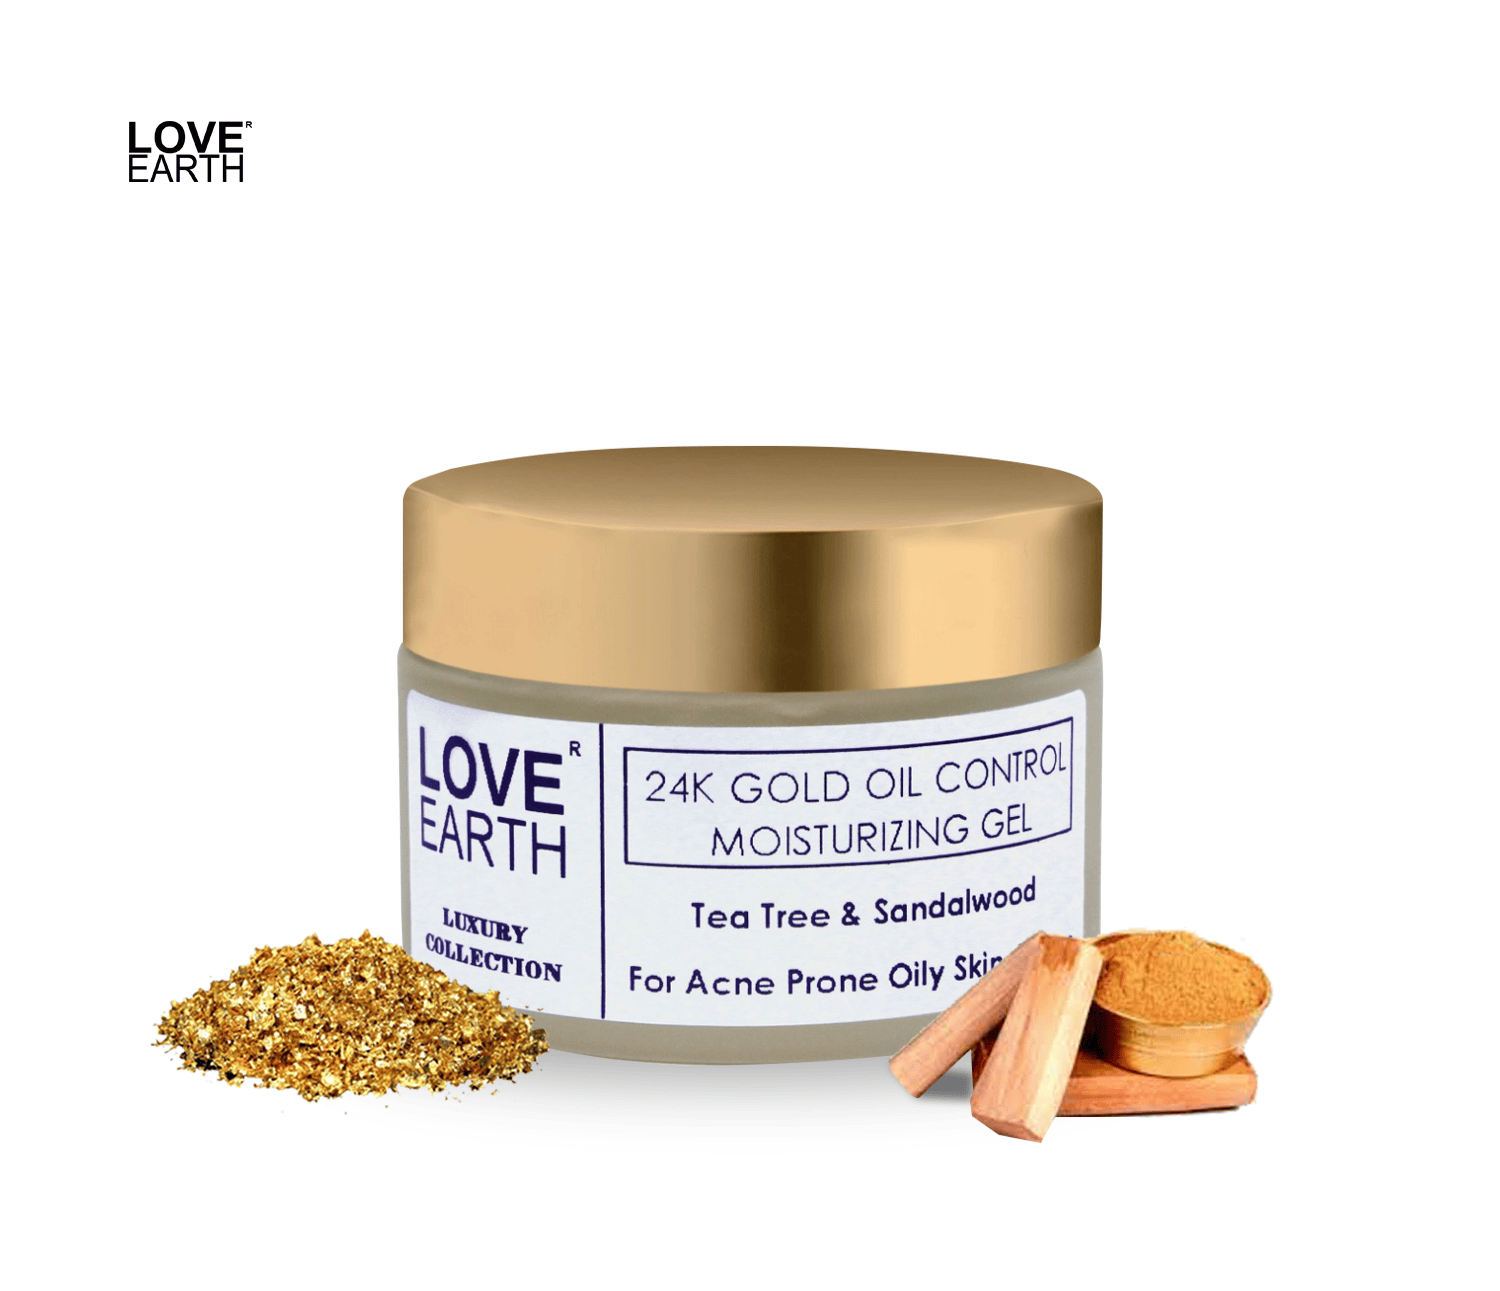 LOVE EARTH | Love Earth 24K Gold Oil Control Moisturizing Gel With Aloe Vera & Sandalwood Extract For Sensitive & Acne-Prone Skin Suitable For All Skin Types 50gm 1